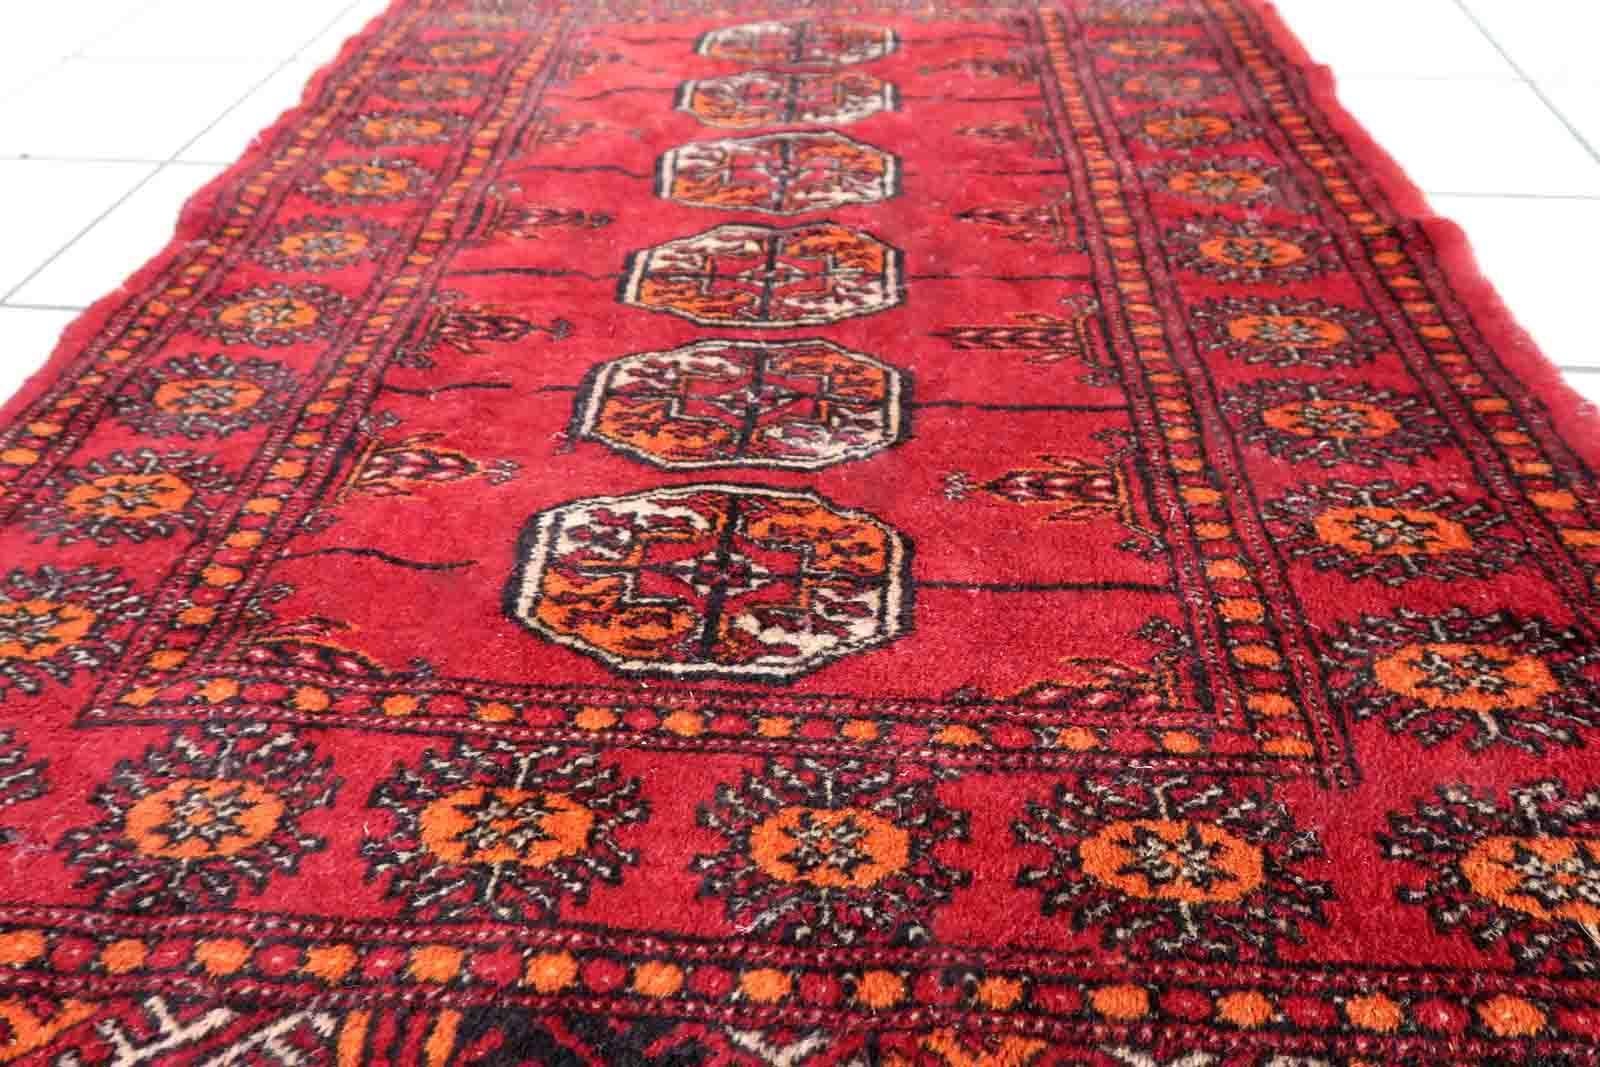 Handmade vintage Pakistani Lahore rug in bright red color. The rug is from the end of 20th century in original condition, it has some low pile. The rug made in traditional design. The rug is thin.

-condition: original, some low pile,

-circa: